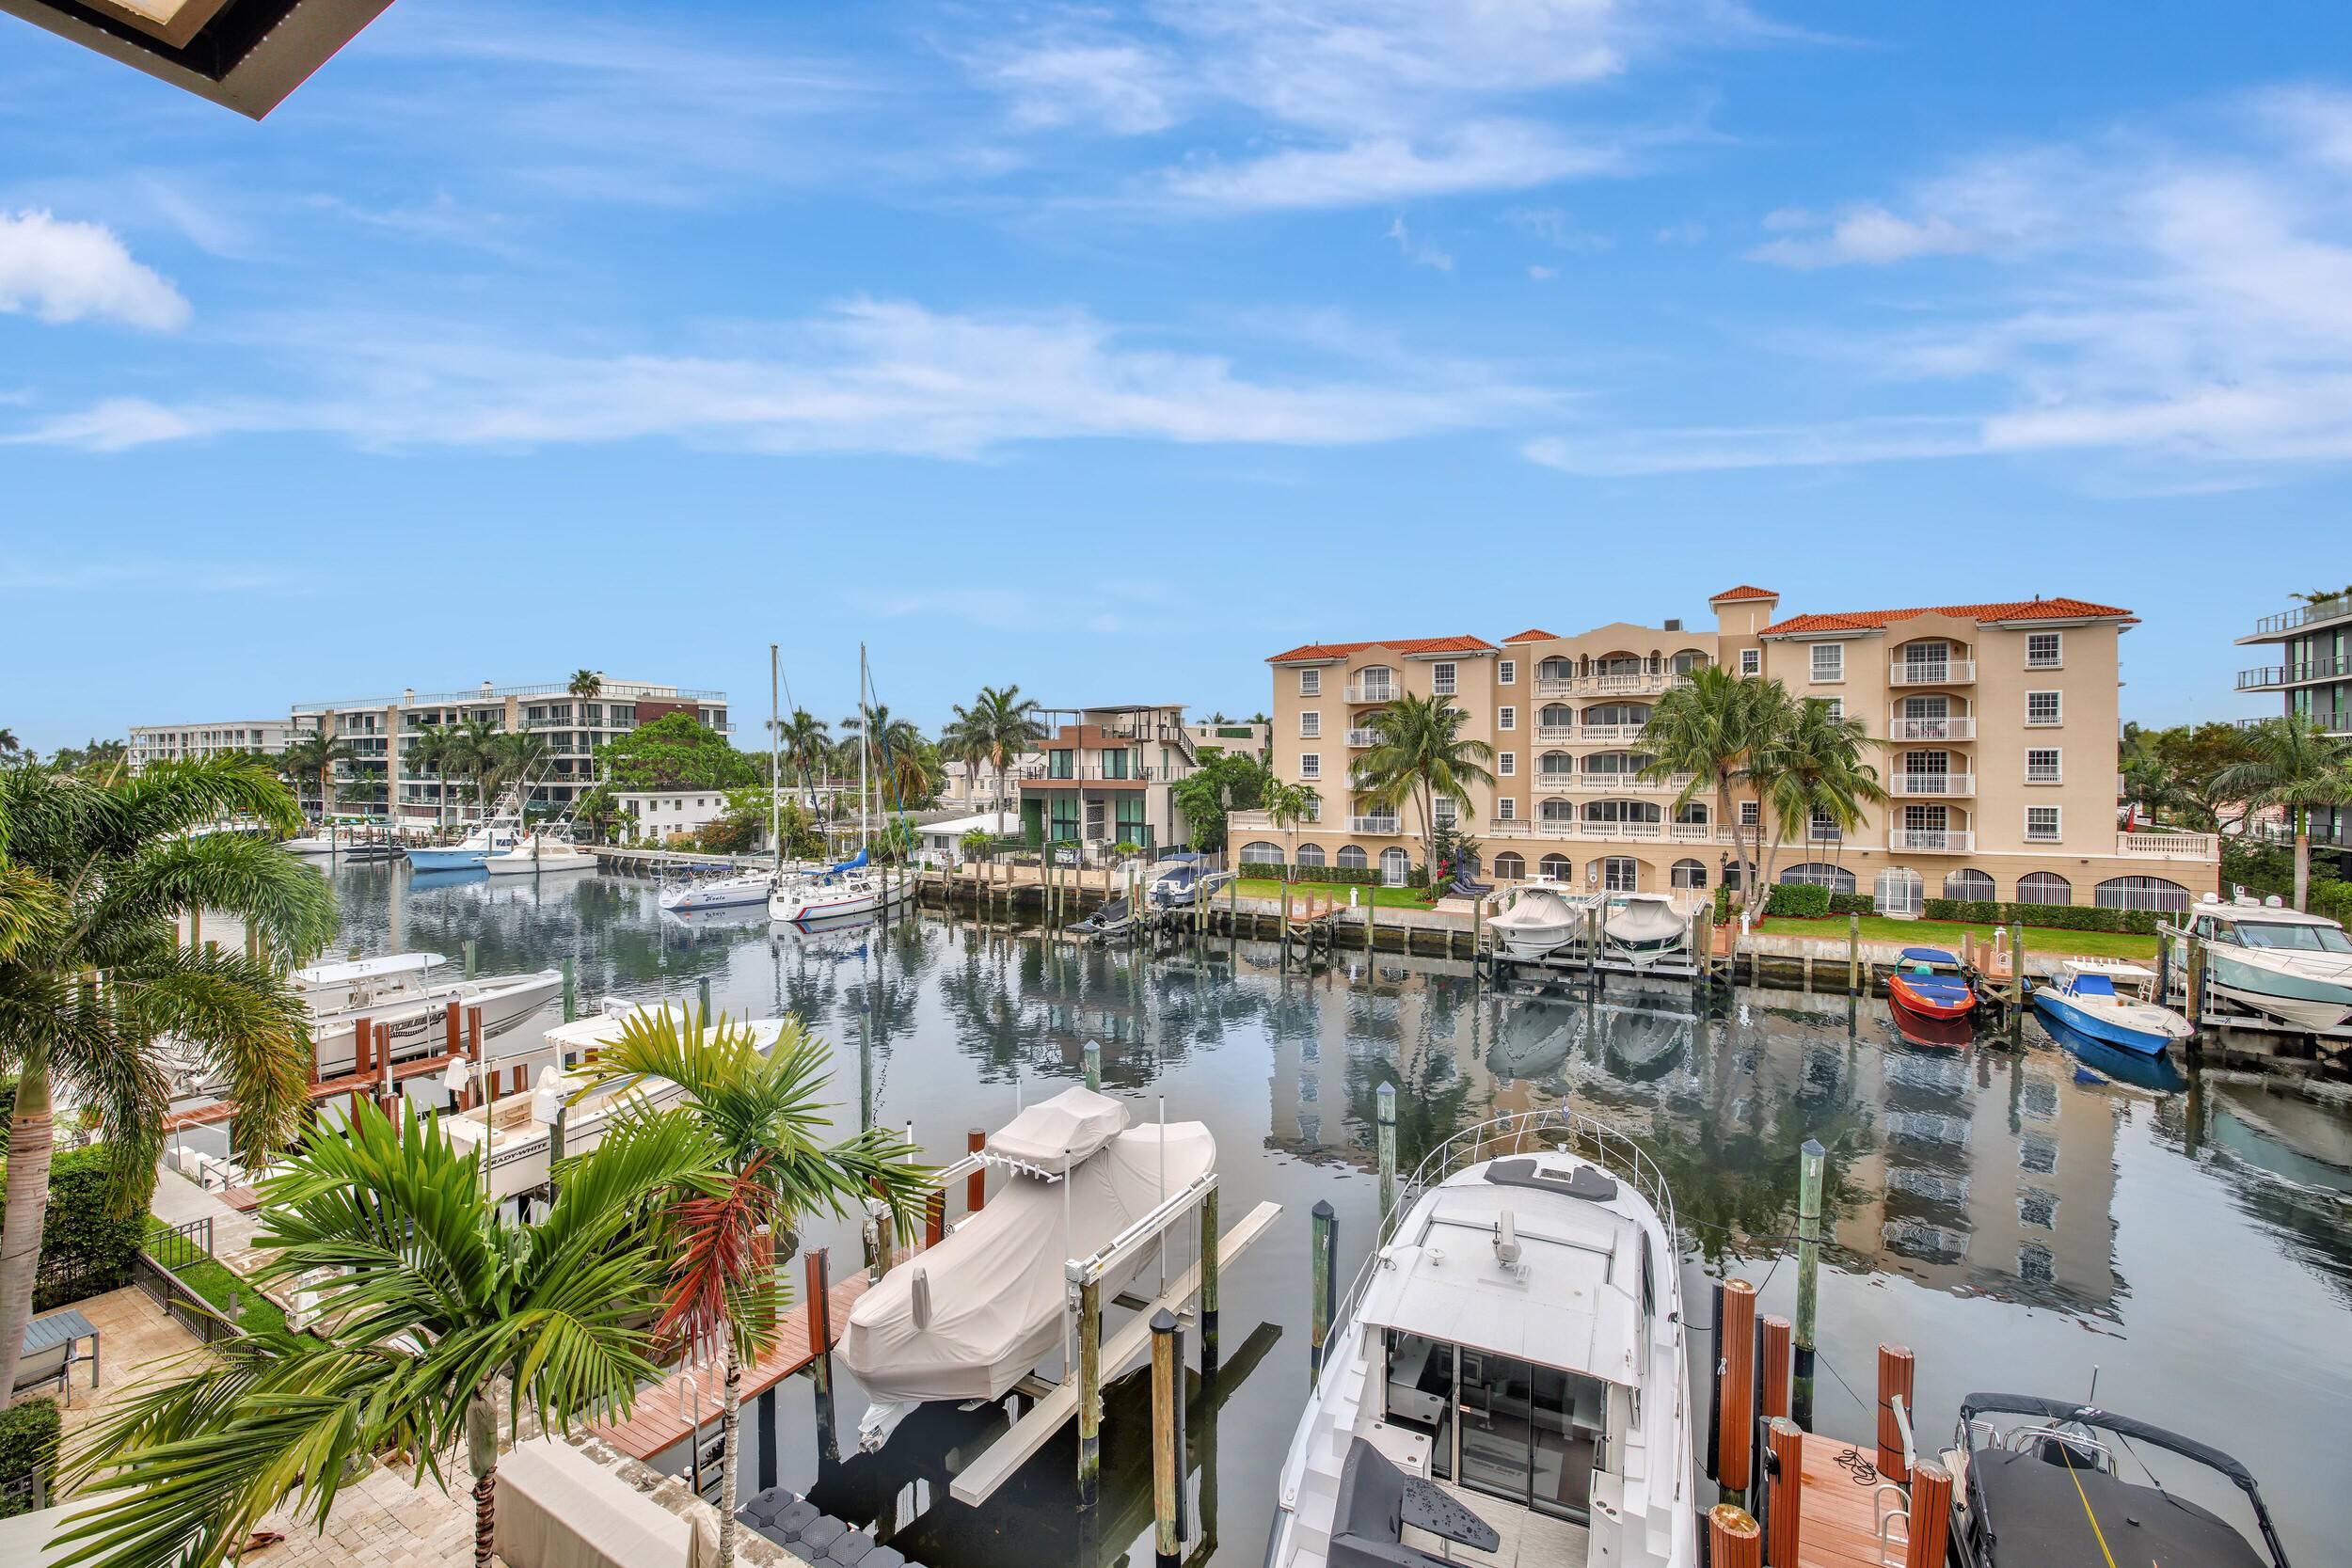 If you are looking for a beautifully furnished and spacious remodeled waterfront 4 bdrm, 41 2 bth townhome with elevator located on Isle of Venice in Ft.